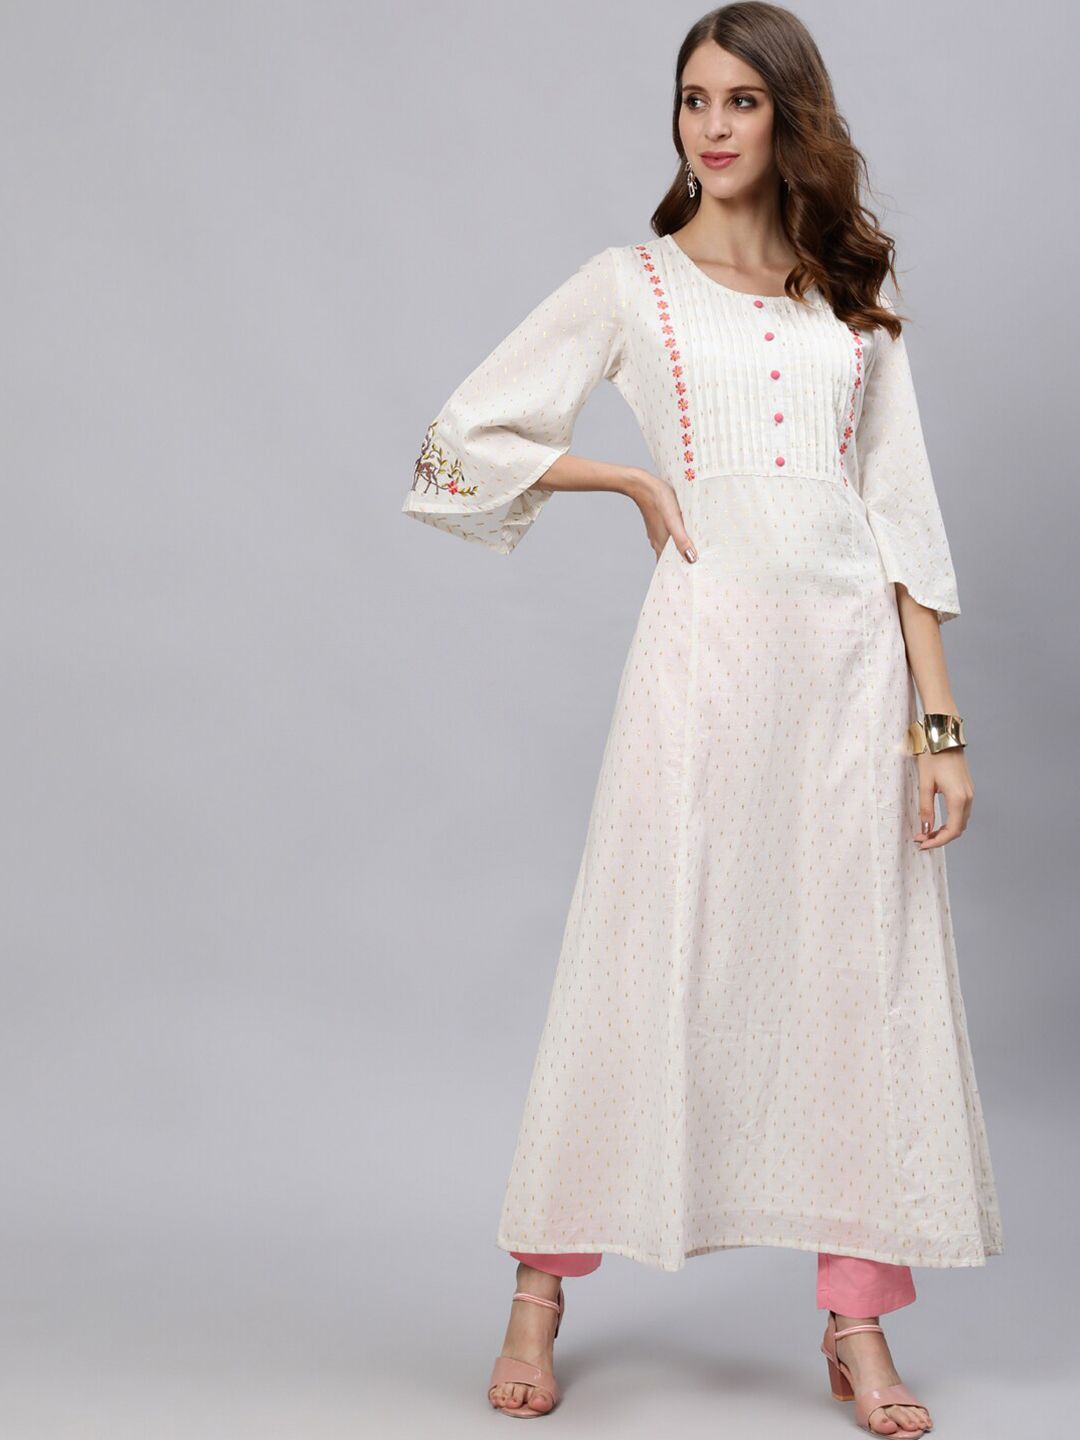 Jaipur Kurti White Embroidered Ethnic A-Line Maxi Dress Price in India